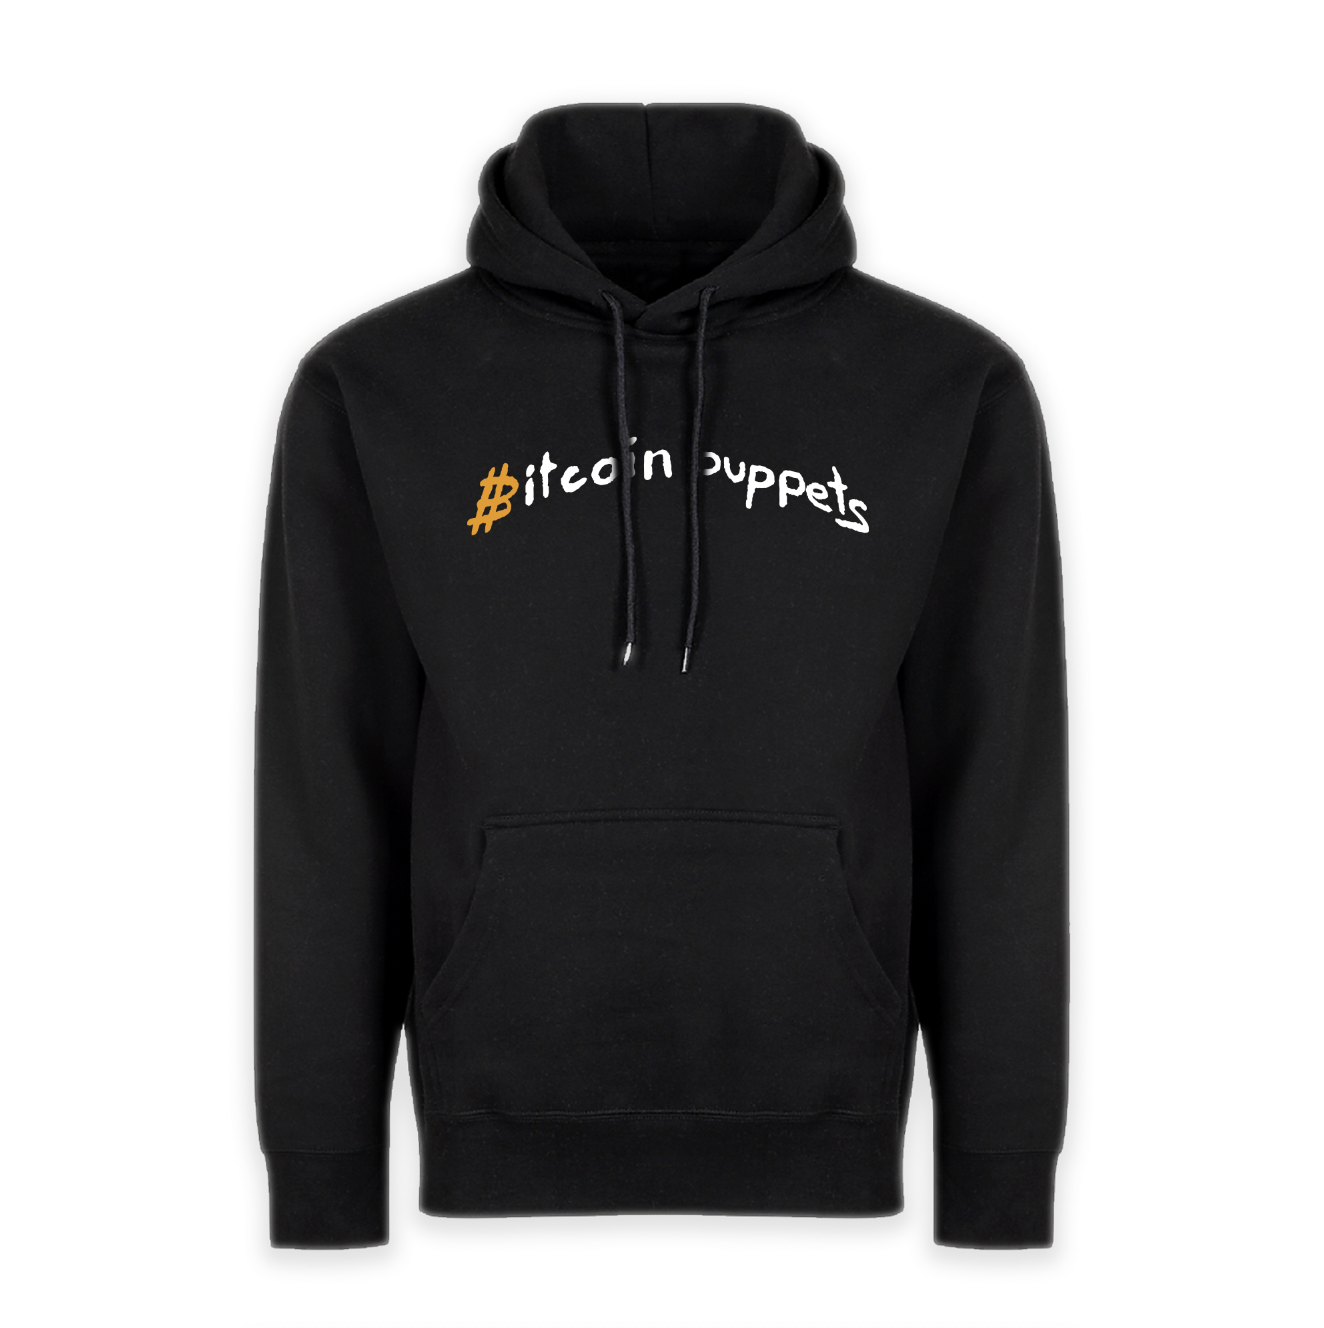 Bitcoin Puppets Hoodie